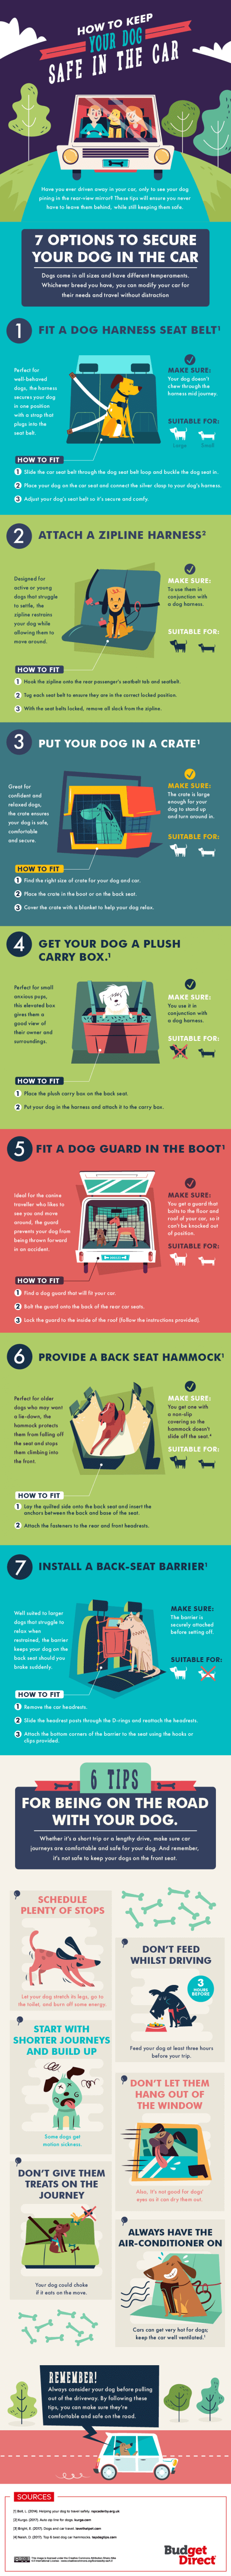 HOW TO TRAVEL WITH DOG IN CAR SAFE & SECURELY - by WWW.THEBARK.COM !